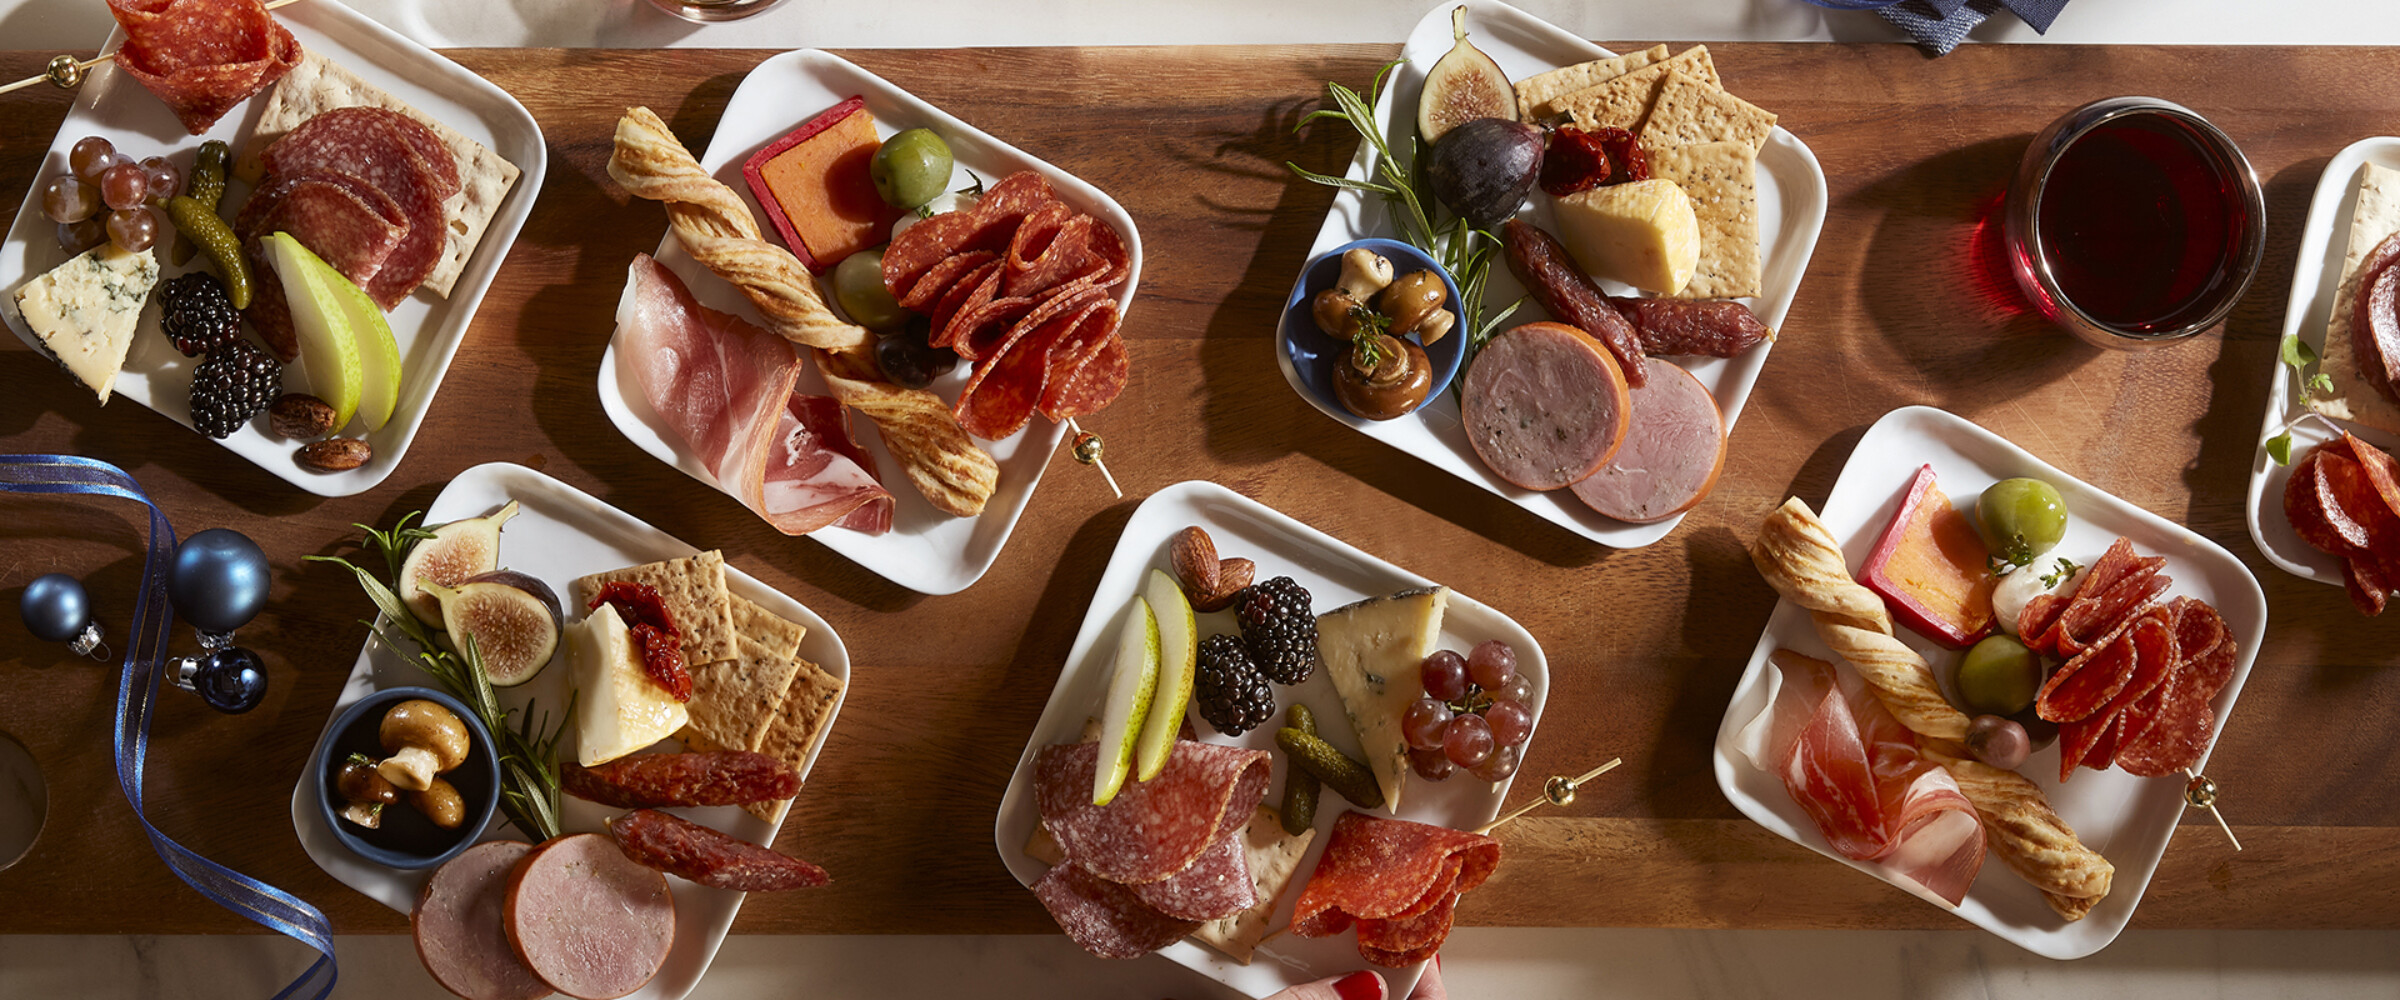 Holiday Charcuterie small plates with meats, cheese, fruits and vegetables.